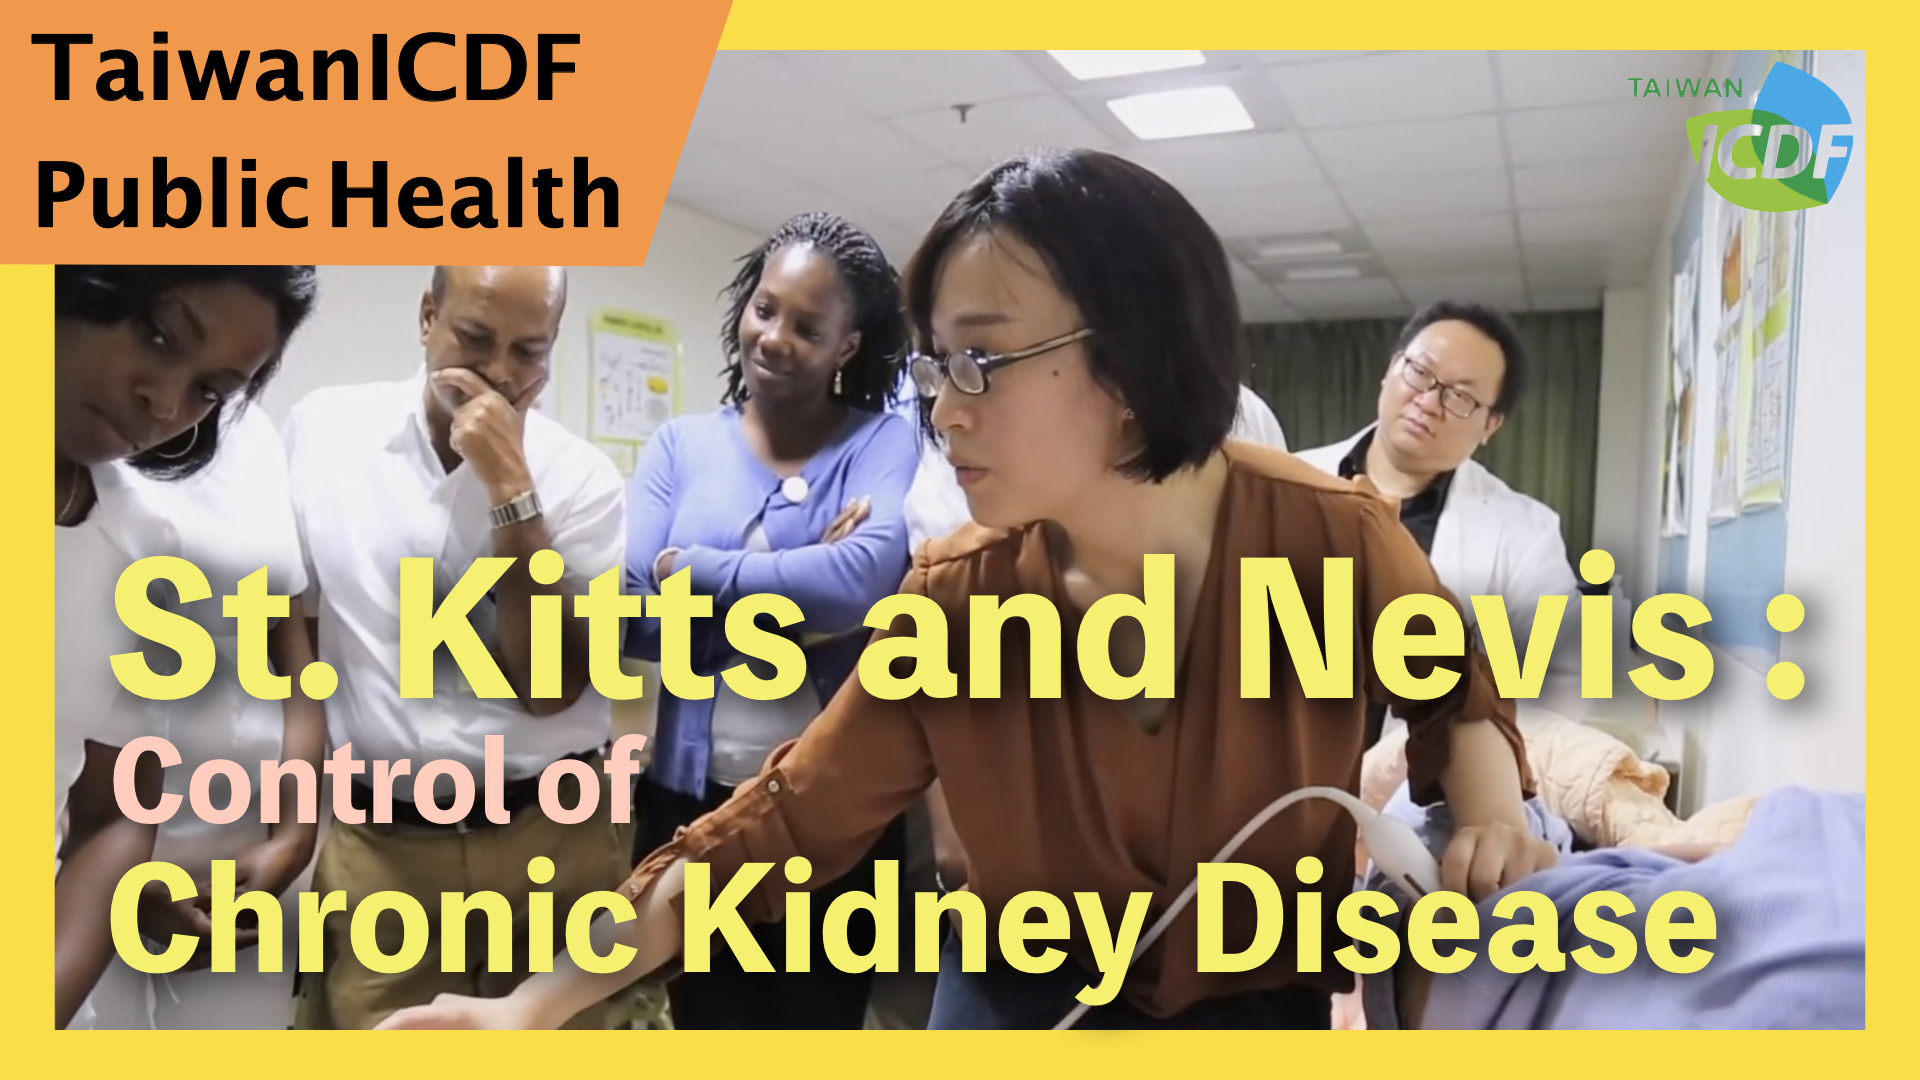 Capacity Building Project for the Prevention and Control of Chronic Kidney Disease in St. Kitts and Nevis